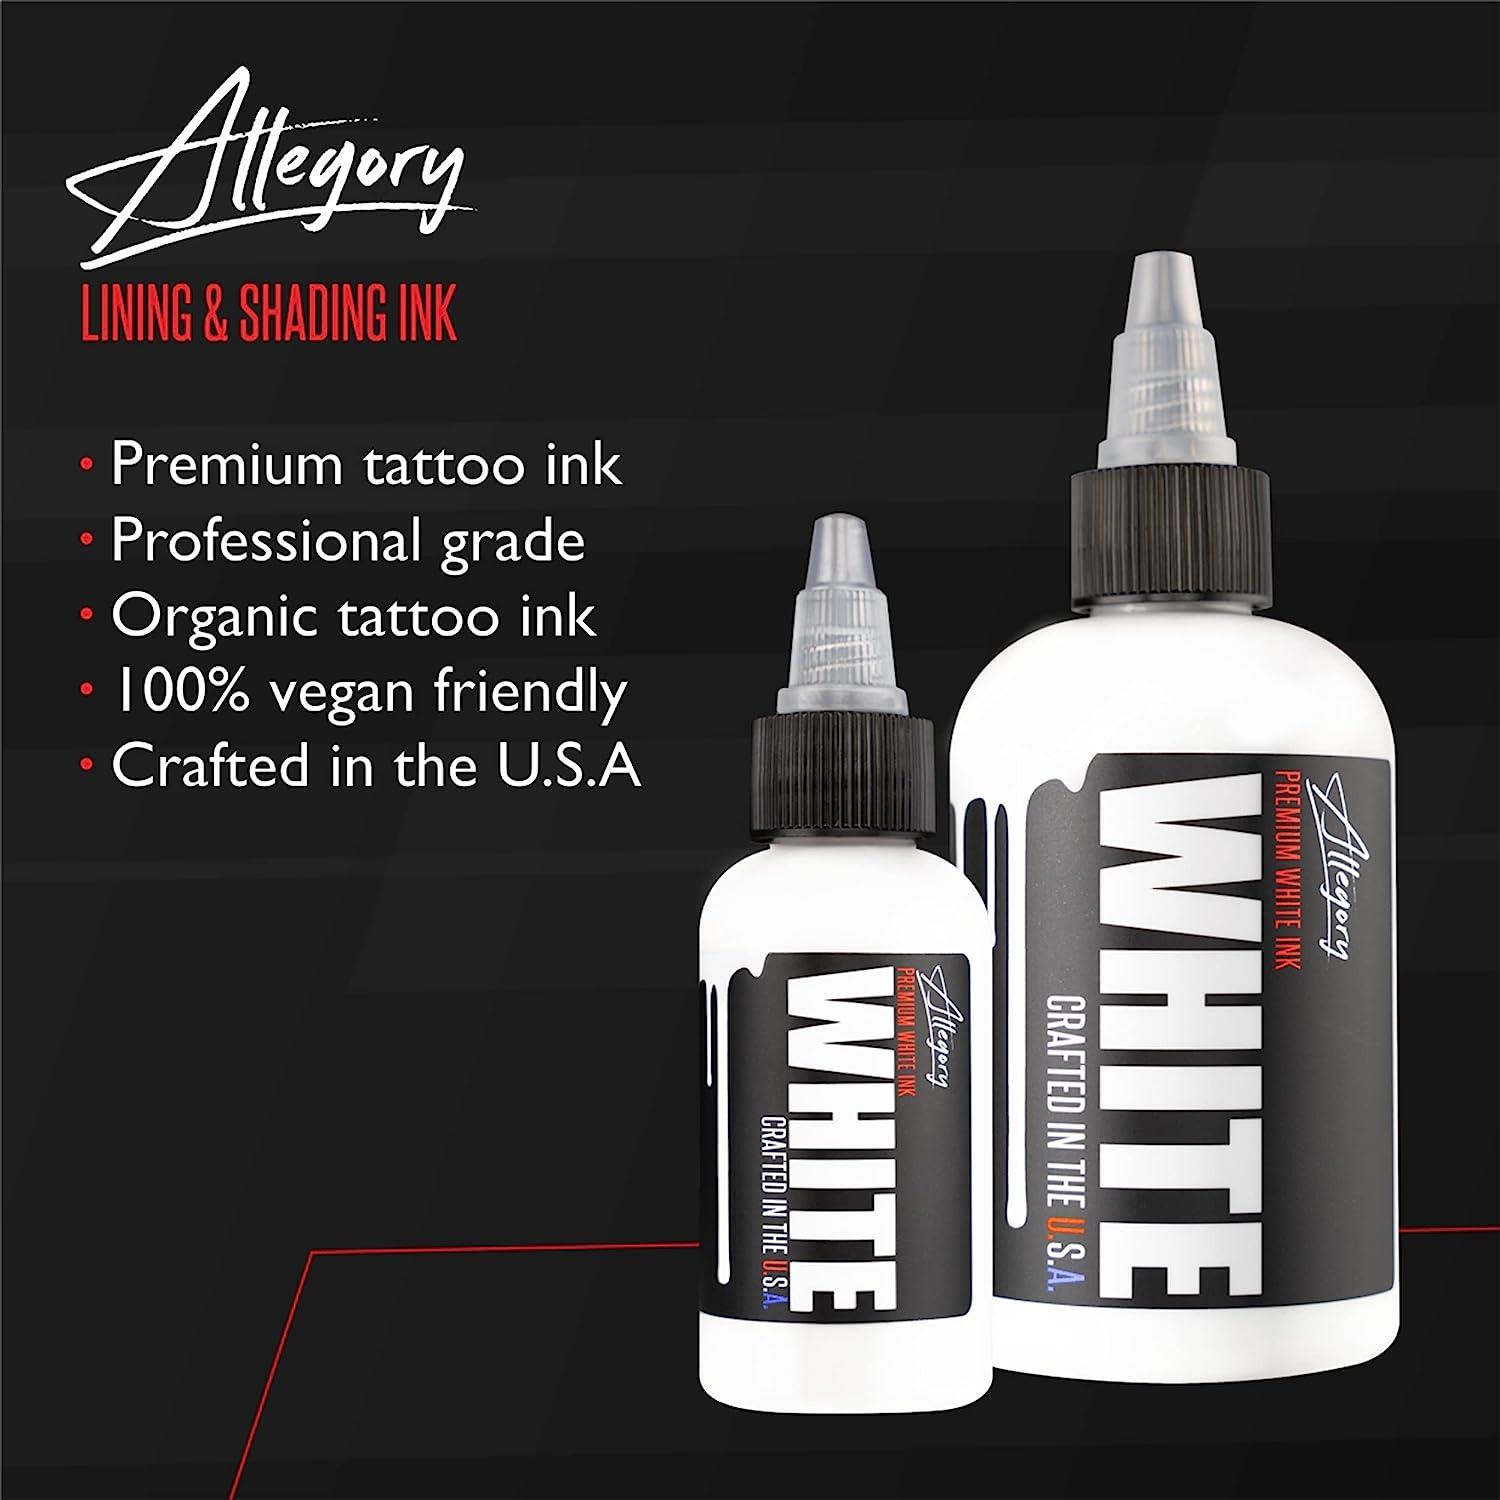 Allegory Tattoo Ink – White, Premium White Tattoo Ink, Perfect for Mixing,  Shading and Highlighting, Smooth, Consistent Pigment, Vegan friendly Tattoo